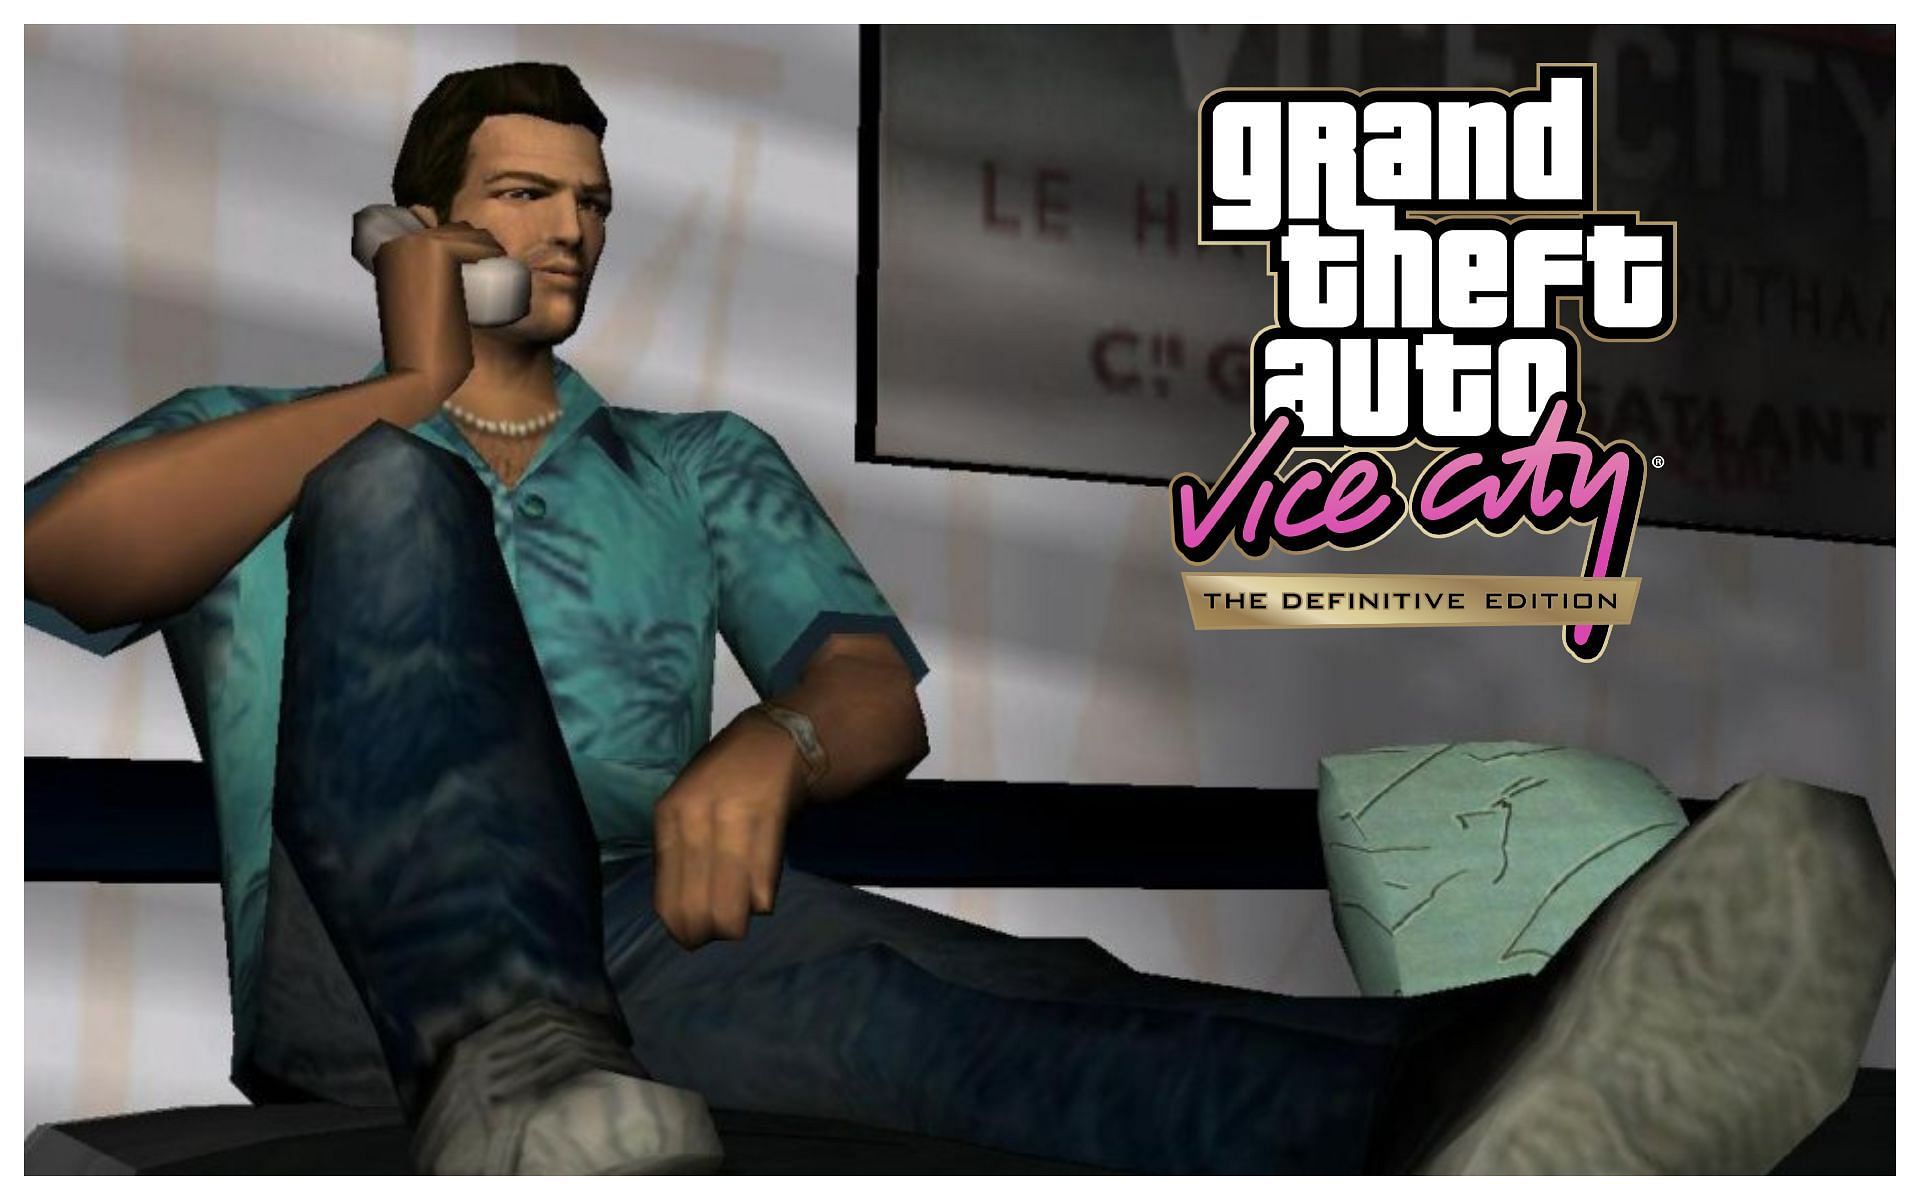 What's your opinion on Tommy Vercetti? : r/GTA